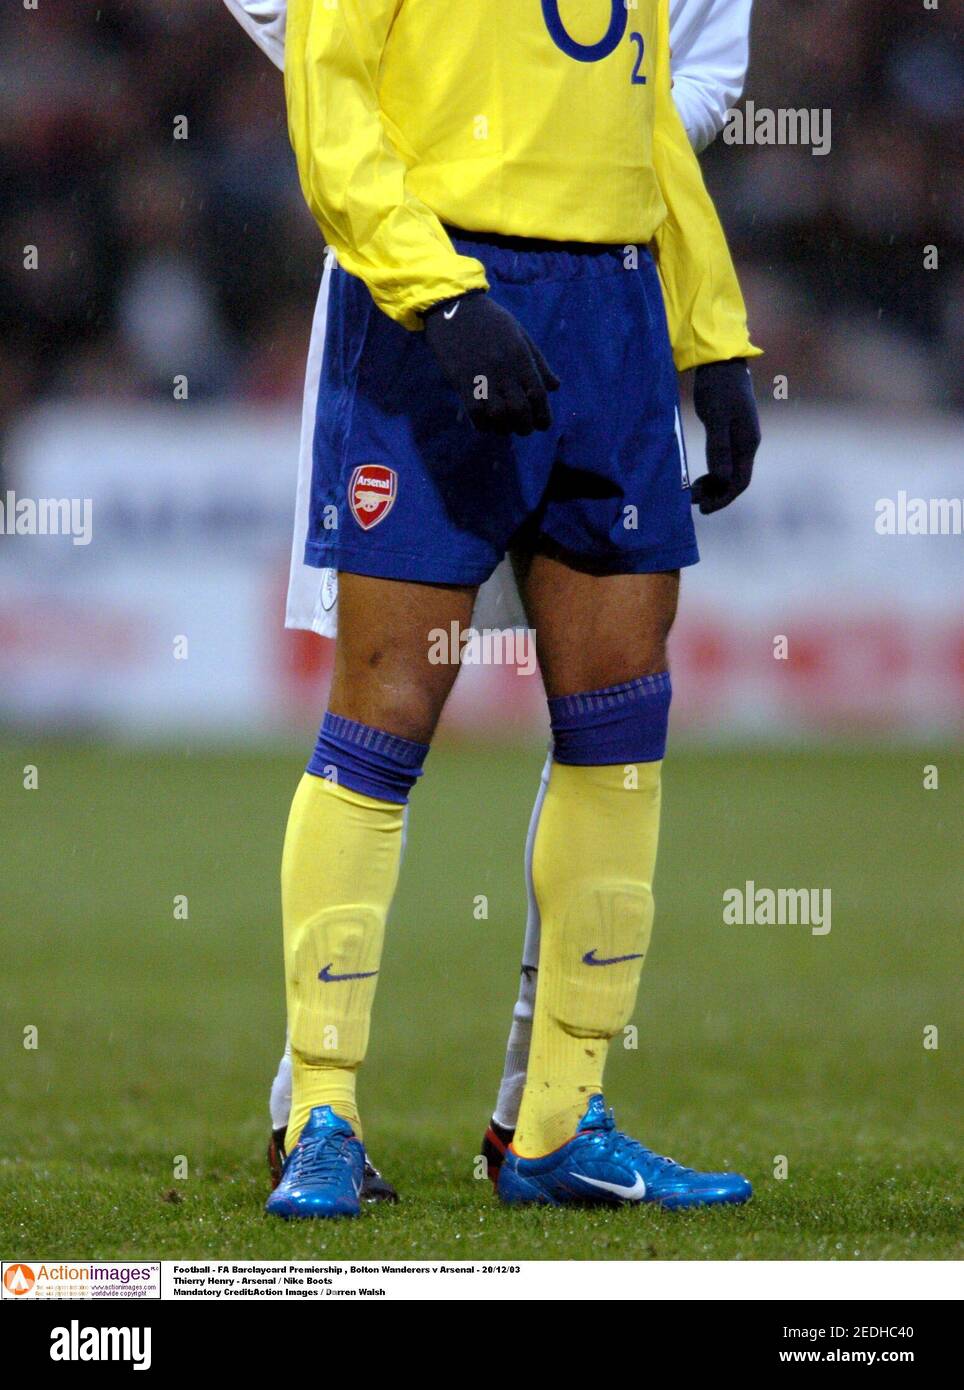 Fútbol - , Bolton Wanderers v Arsenal - 20/12/03 Thierry Henry - Arsenal / Nike Boots crédito obligatorio:Action Images / Darren Walsh Fotografía stock - Alamy